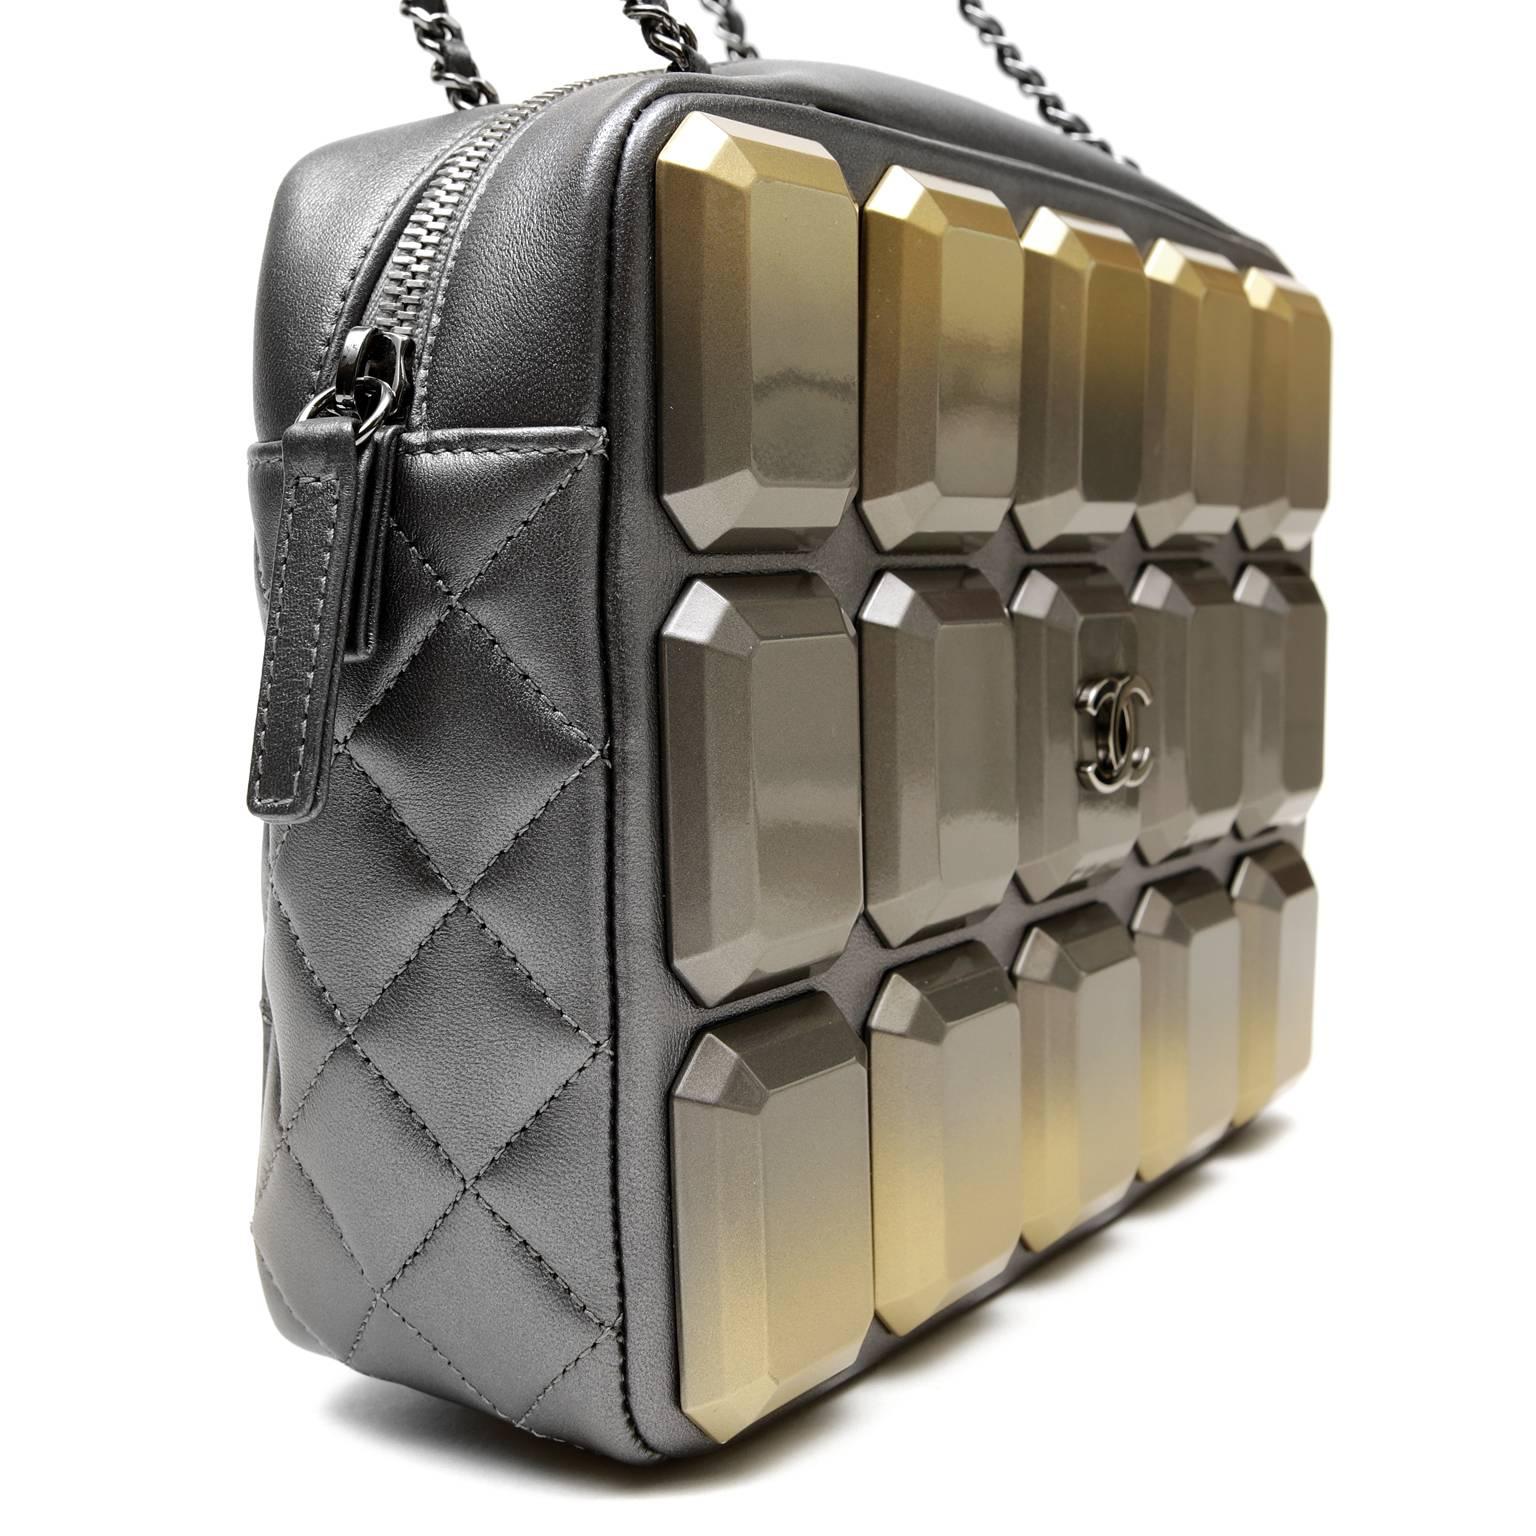 Gray Chanel Pewter Evening Art Flap Camera Bag- Runway 2014 For Sale